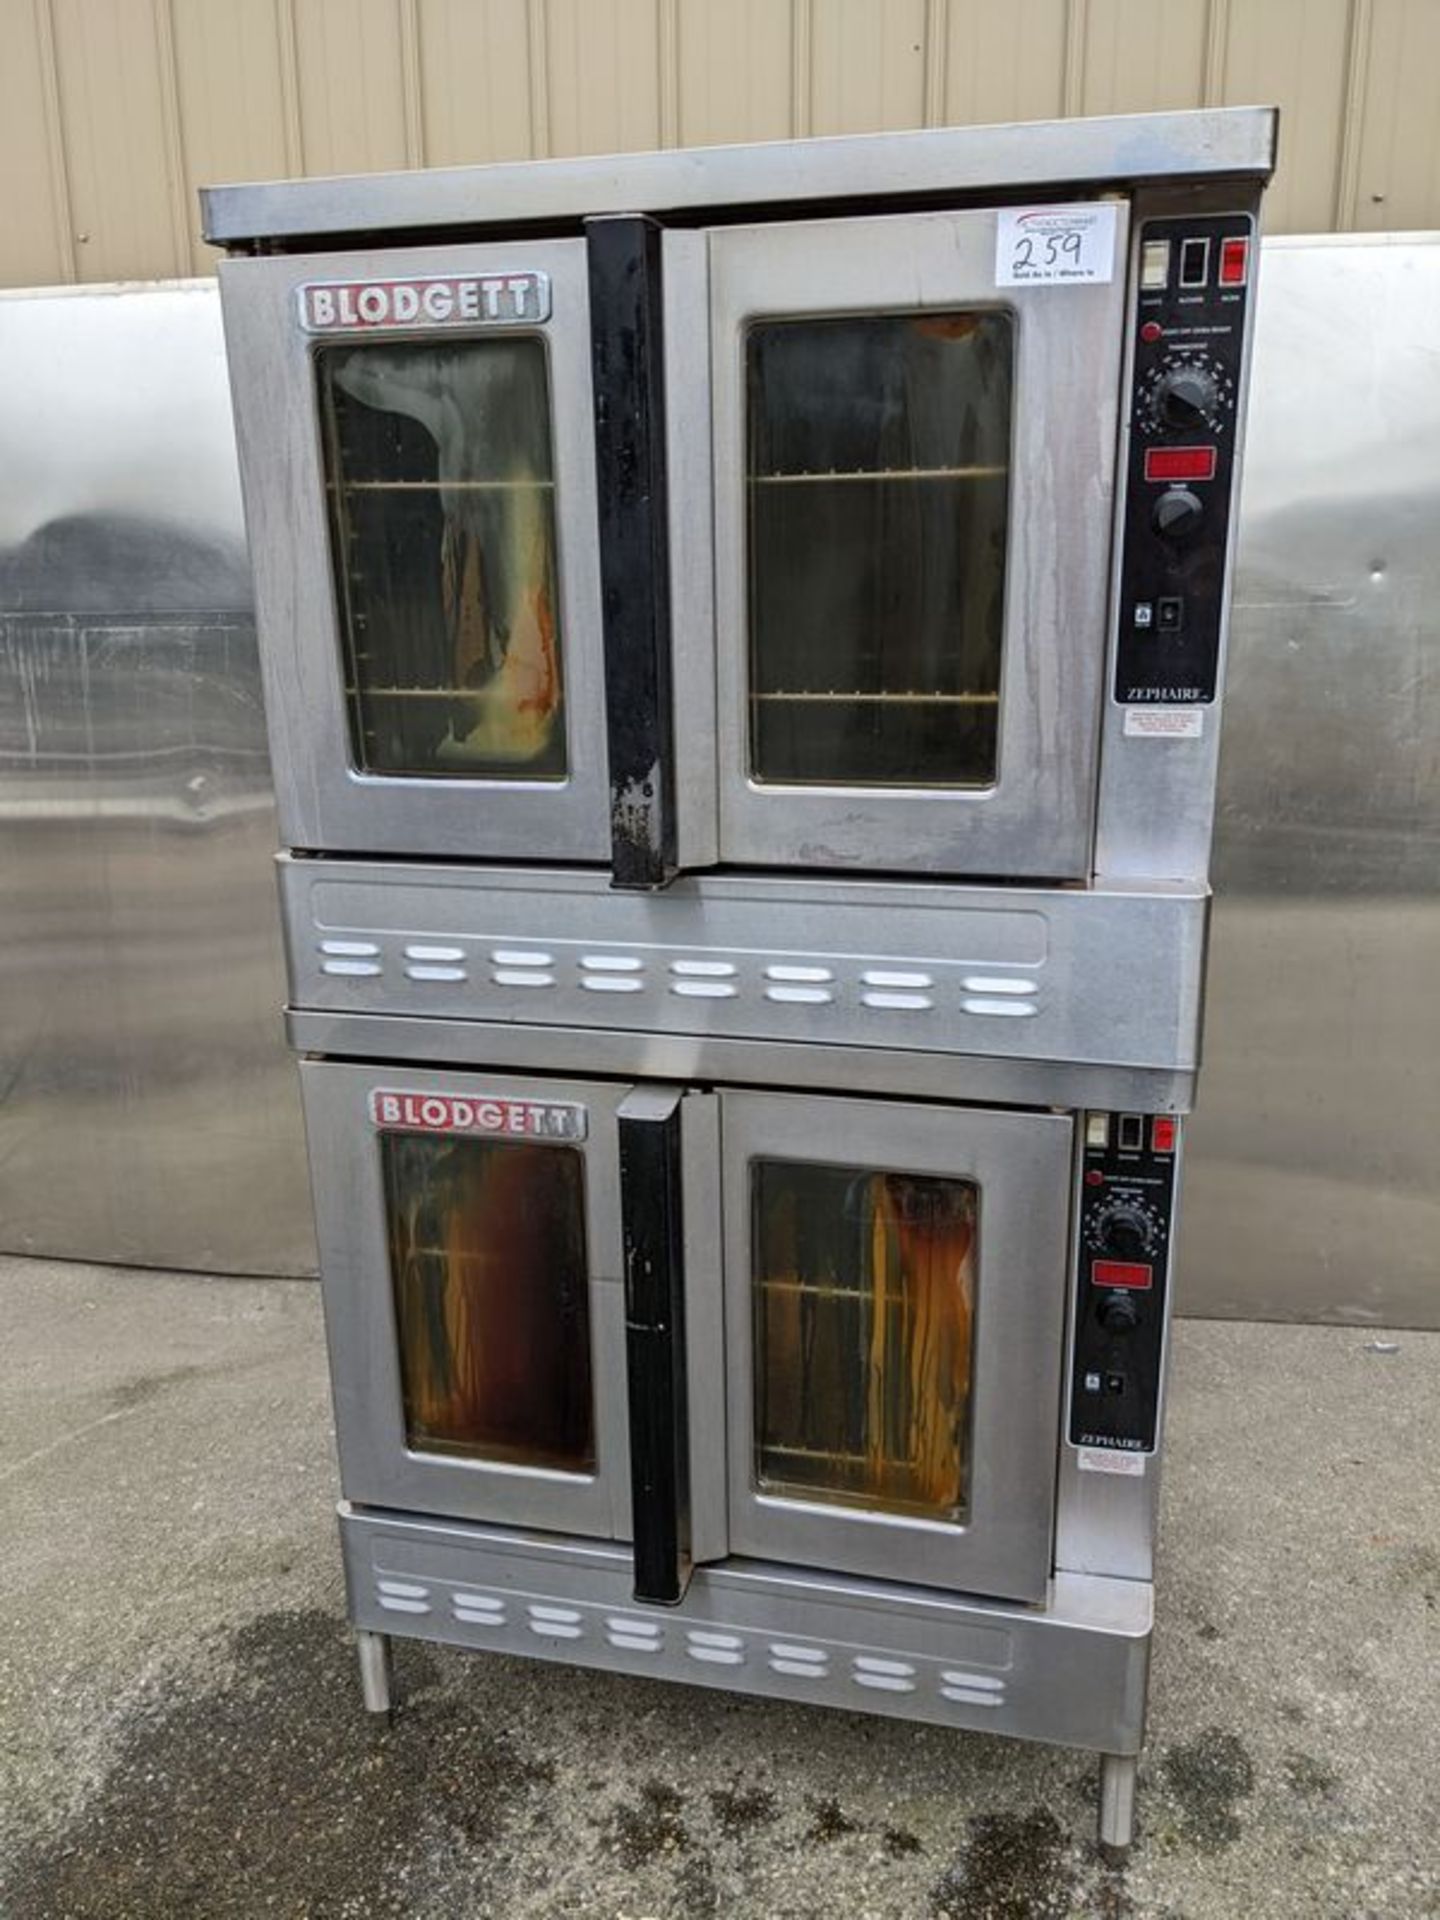 Blodgett Zephaire Double Stack Gas Convection Ovens